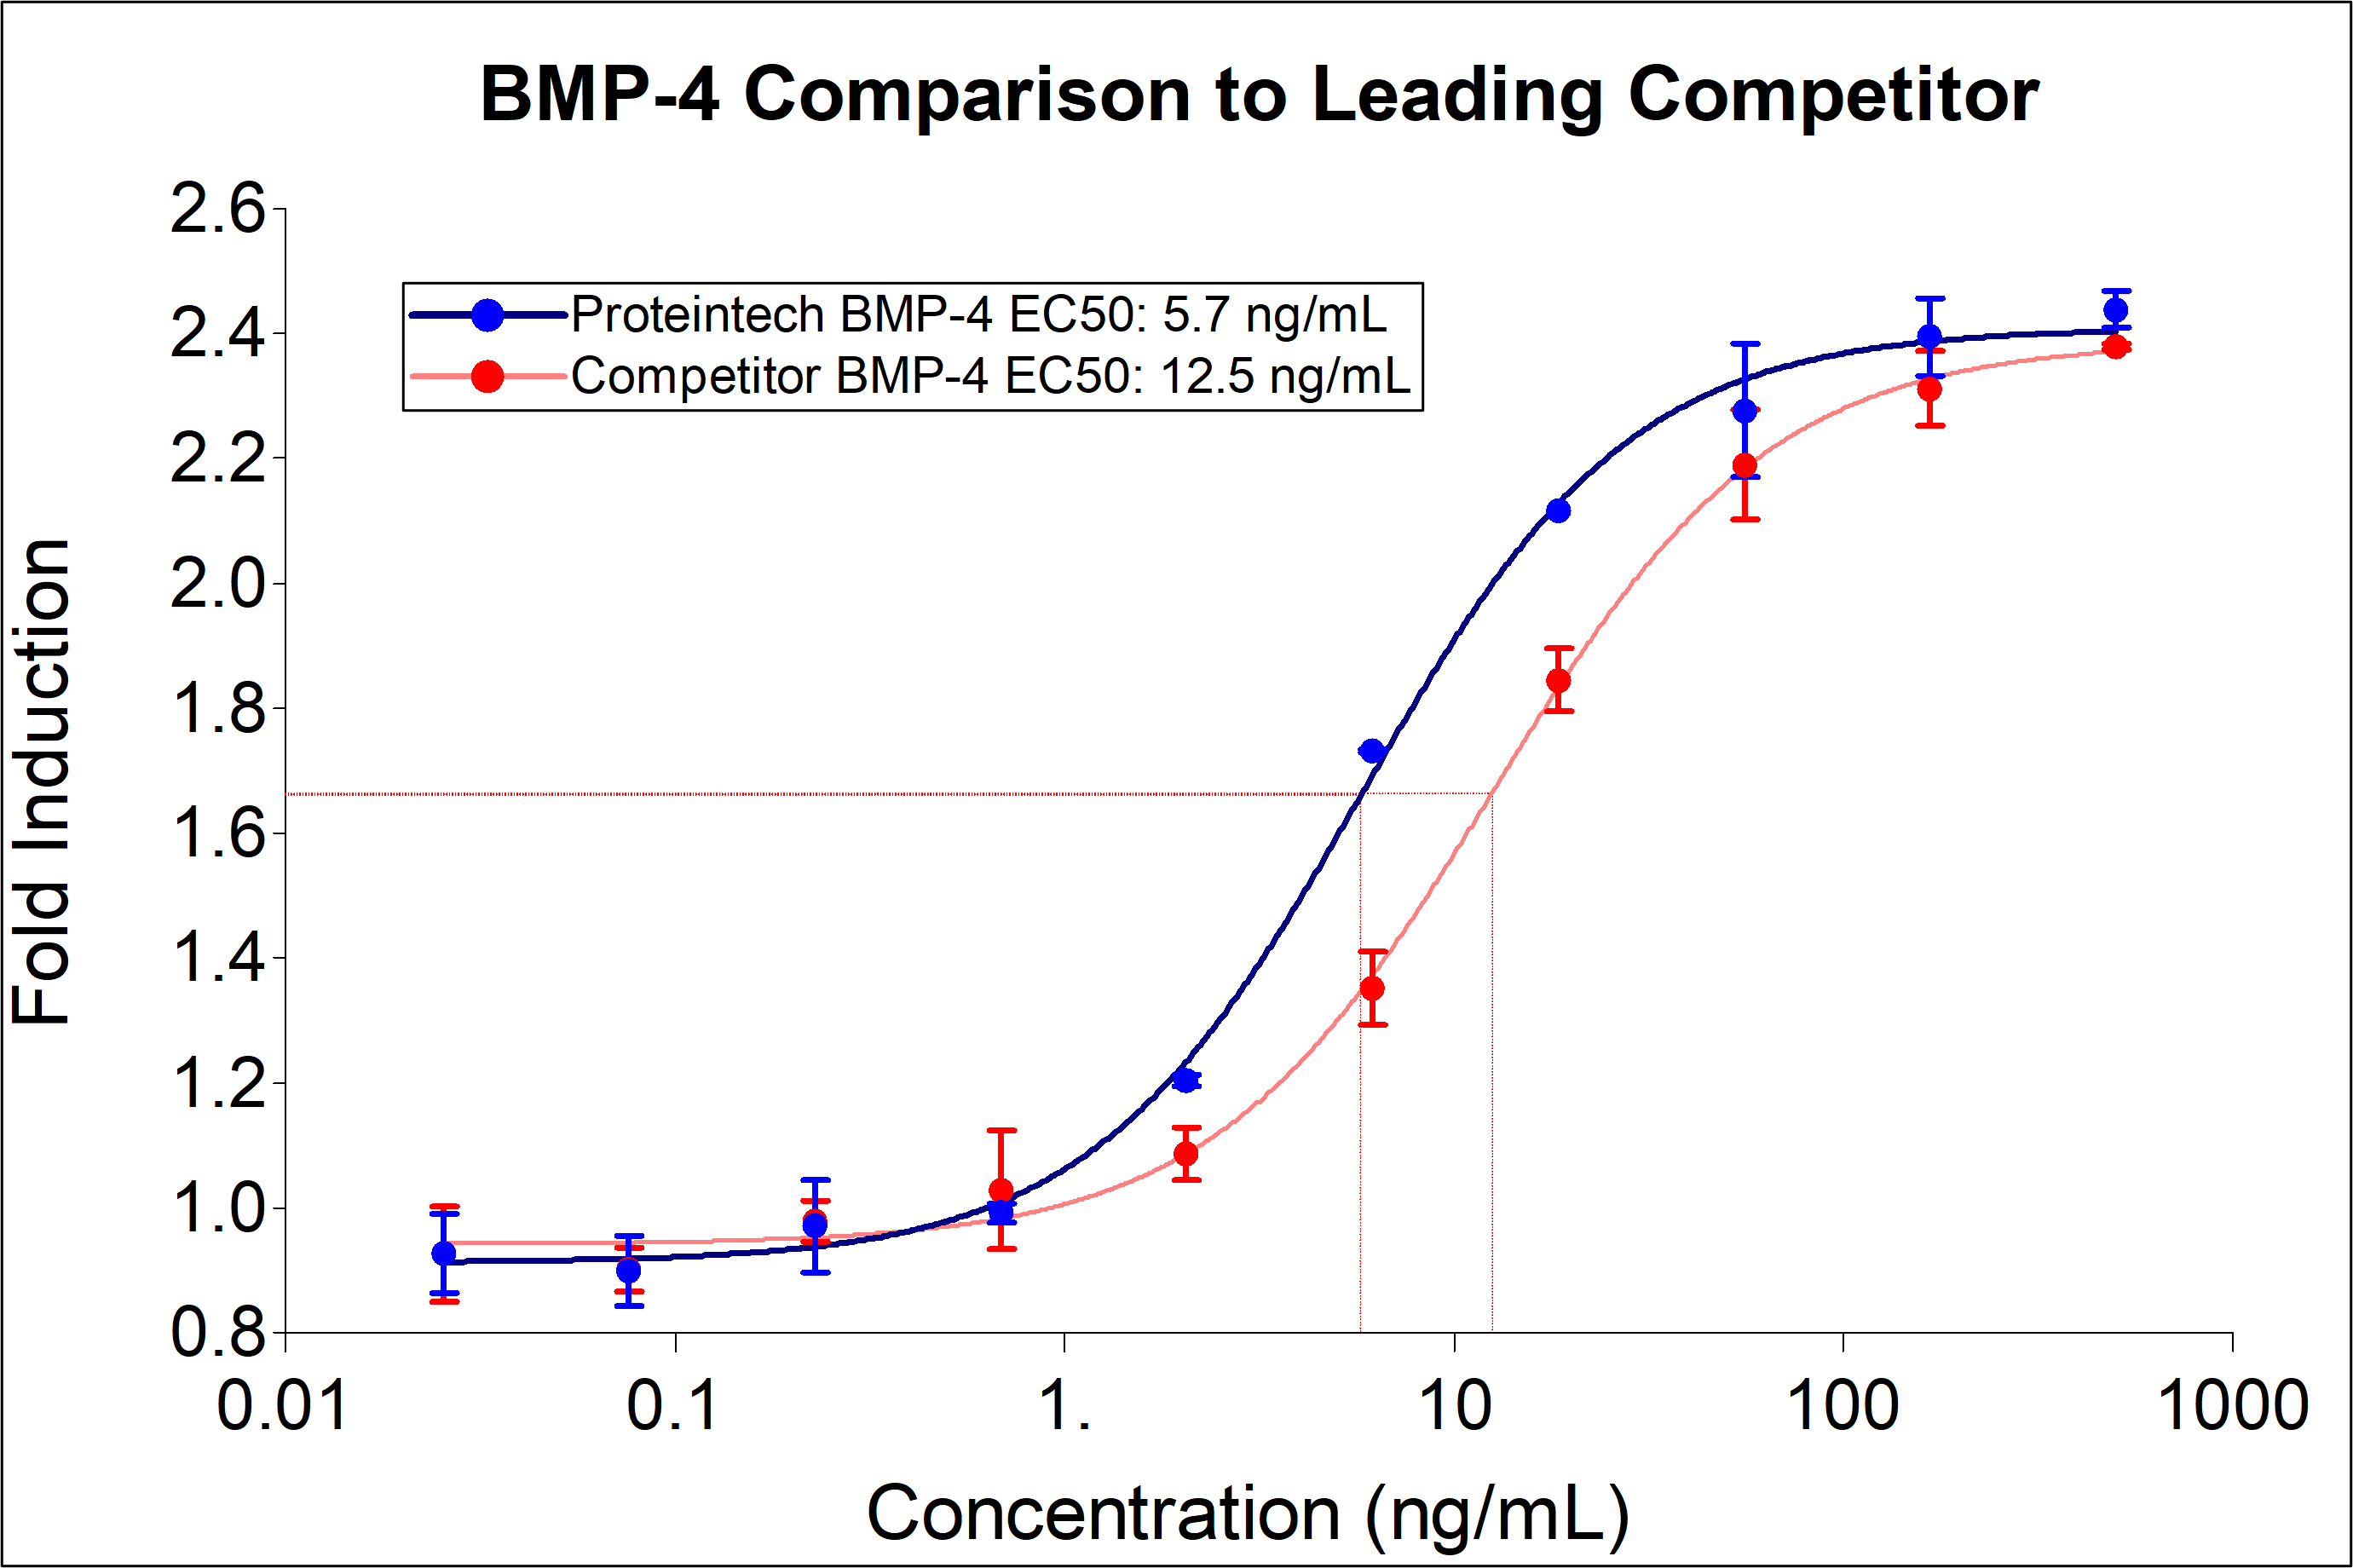 Proteintech BMP-4 (HZ-1045) demonstrates equivalent induction and 2-fold lower EC50 compared to leading competitors. Recombinant human BMP-4 stimulates dose-dependent induction of alkaline phosphatase production in the ATDC-5 mouse chondrogenic cell line. Alkaline phosphatase production was assessed using pNPP as a chromogenic substrate. ATDC-5 cells were treated with increasing concentrations of recombinant human BMP-4 for 72 hours before lysis and addition of pNPP. The EC50 was determined using a 4-parameter non-linear regression model. The EC50 values range from 1.5-9 ng/ml.